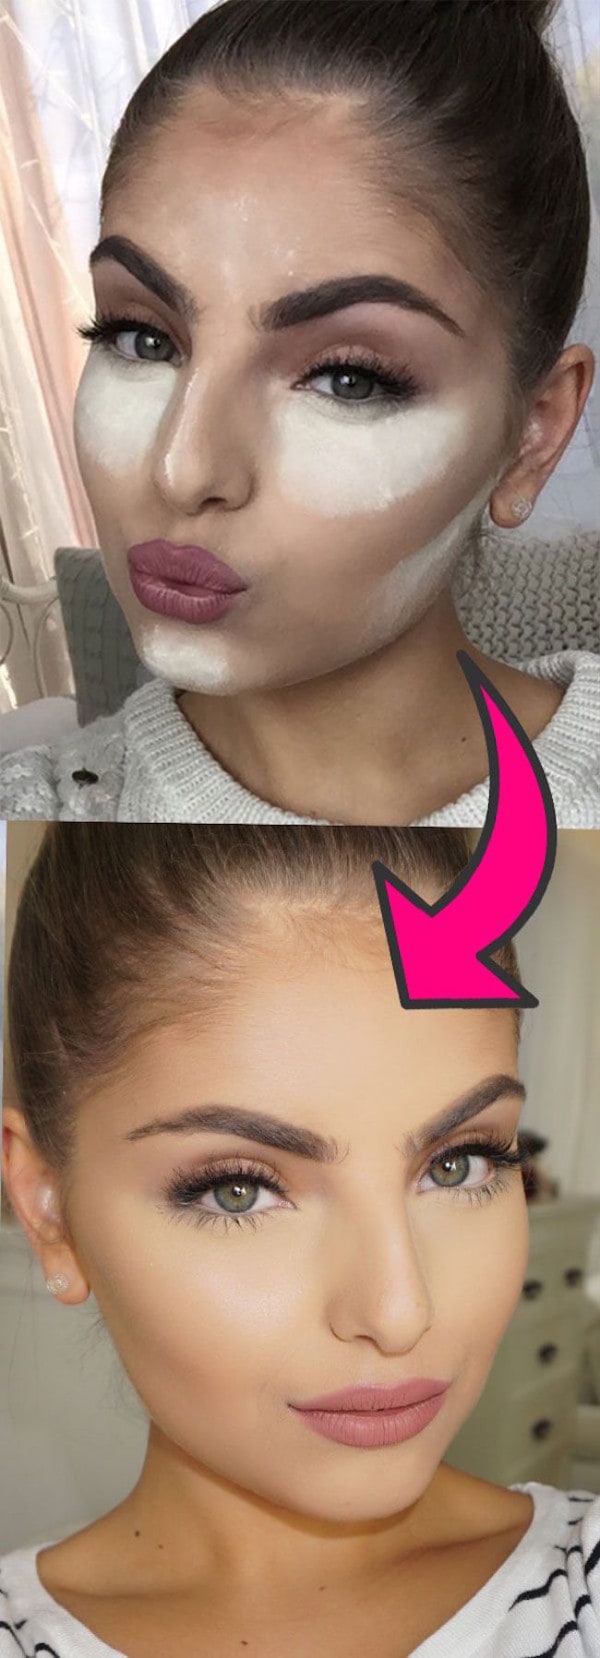 14 Absolutely Smart And Super Easy Beauty Fashion Hacks And Tips